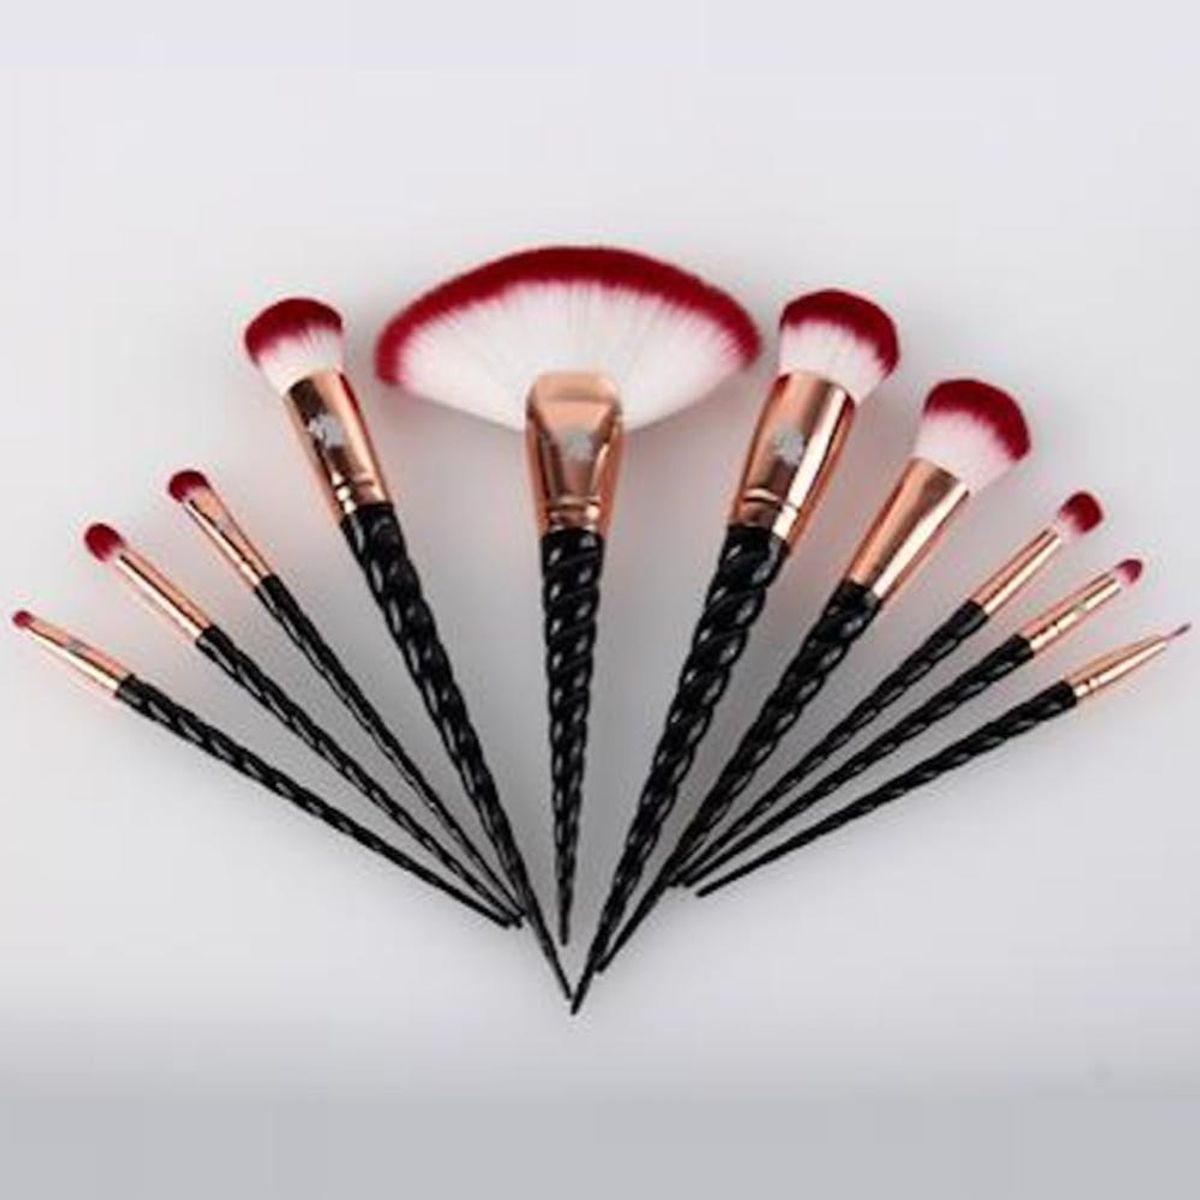 Rose-Gold Unicorn Brushes Are About to Become a Reality